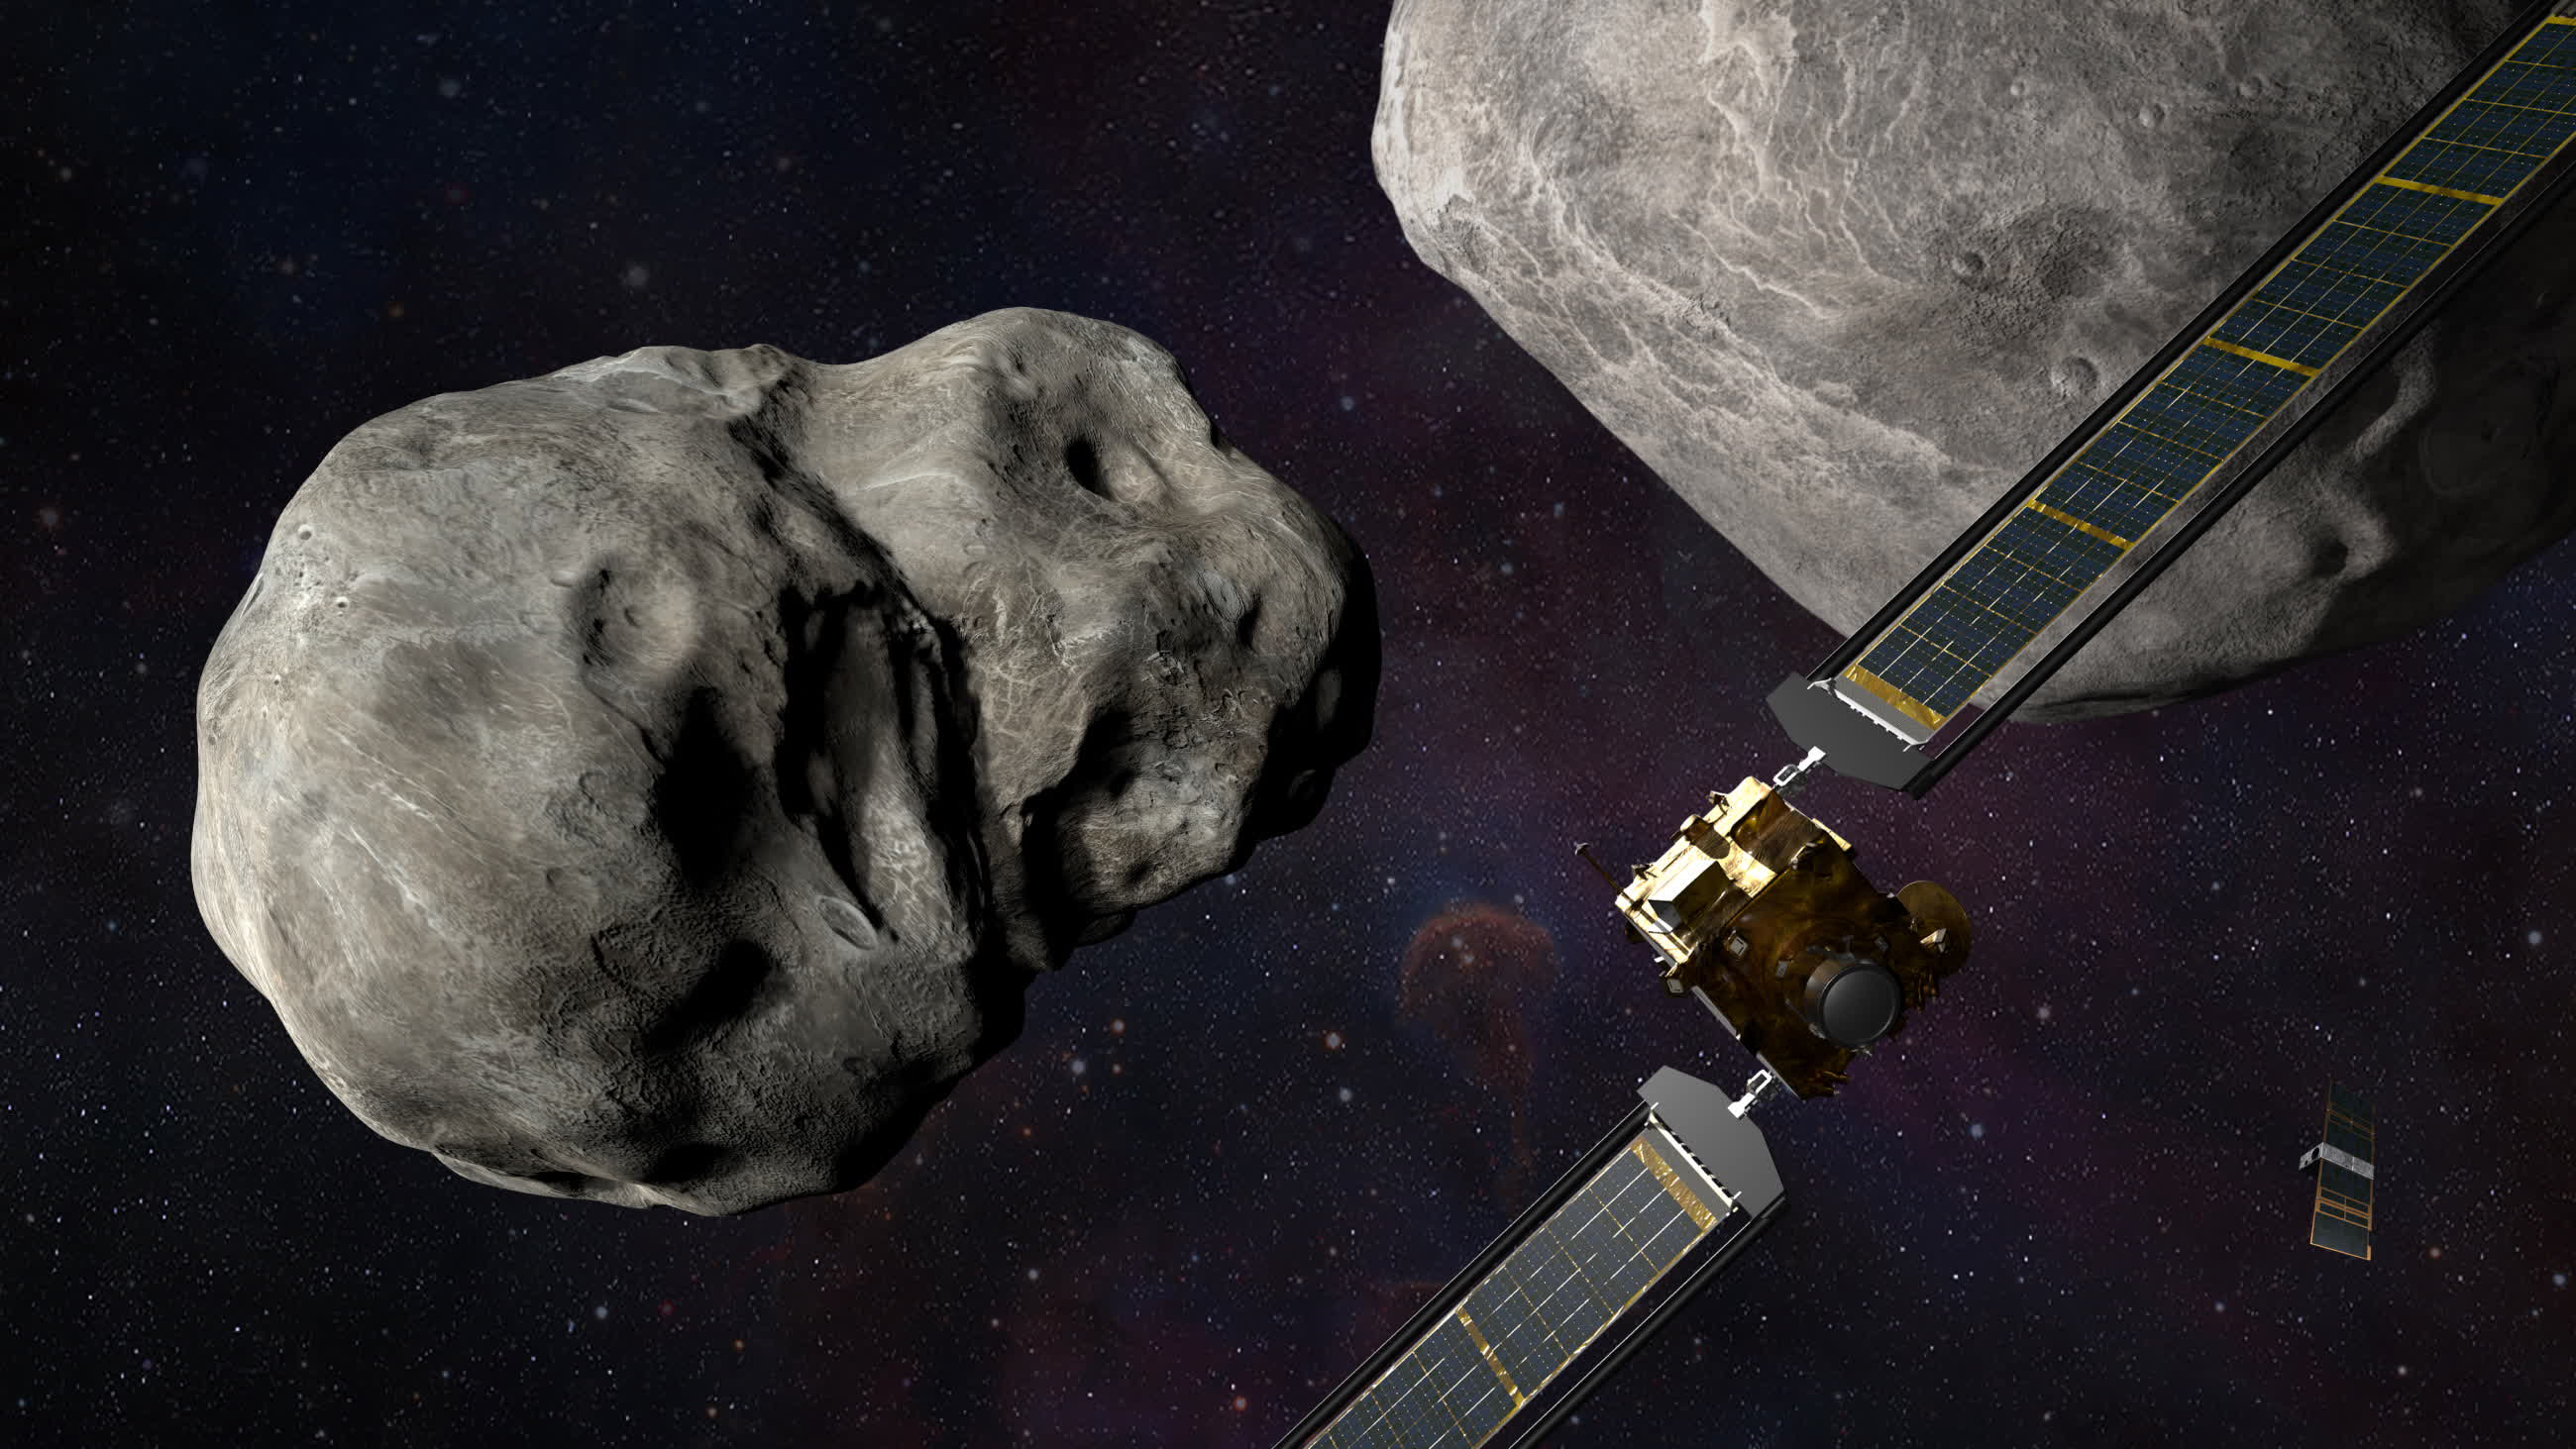 New data on NASA DART mission confirms Earth's asteroid-deflecting capabilities